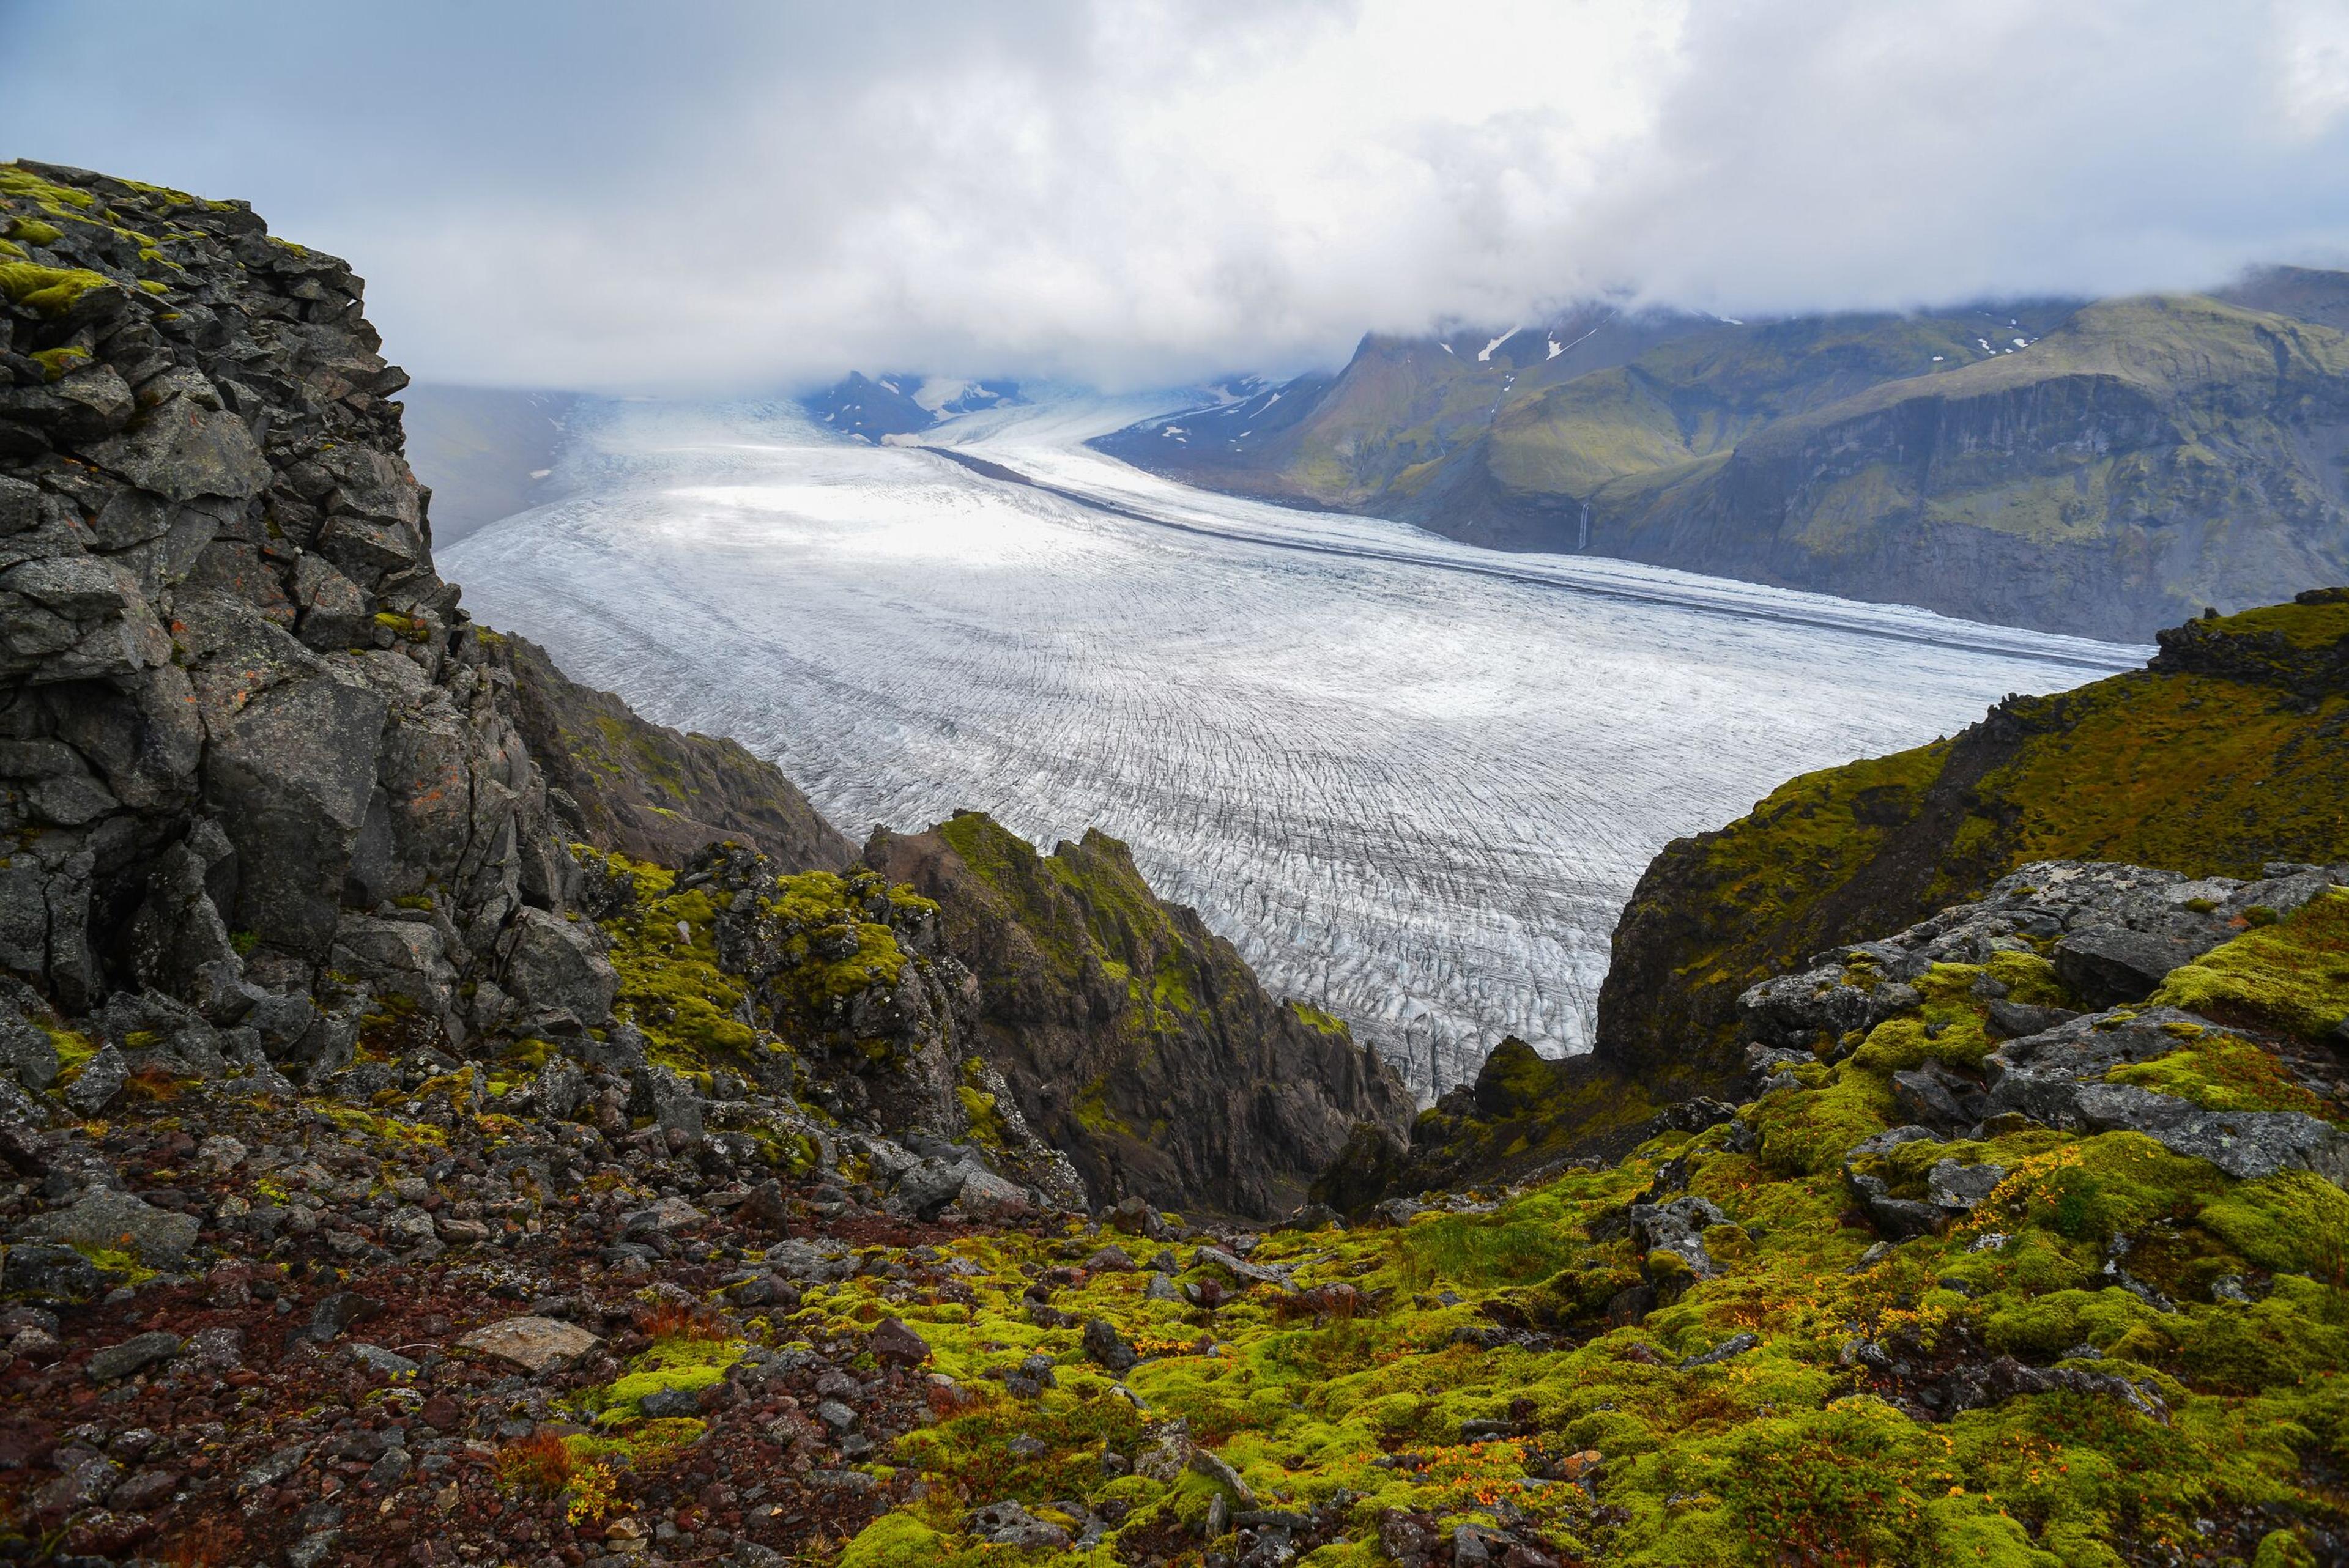 "Skaftafellsjökull glacier tongue snaking its way downhill, flanked by rugged, craggy hills, showcasing the raw beauty of Icelandic landscapes.